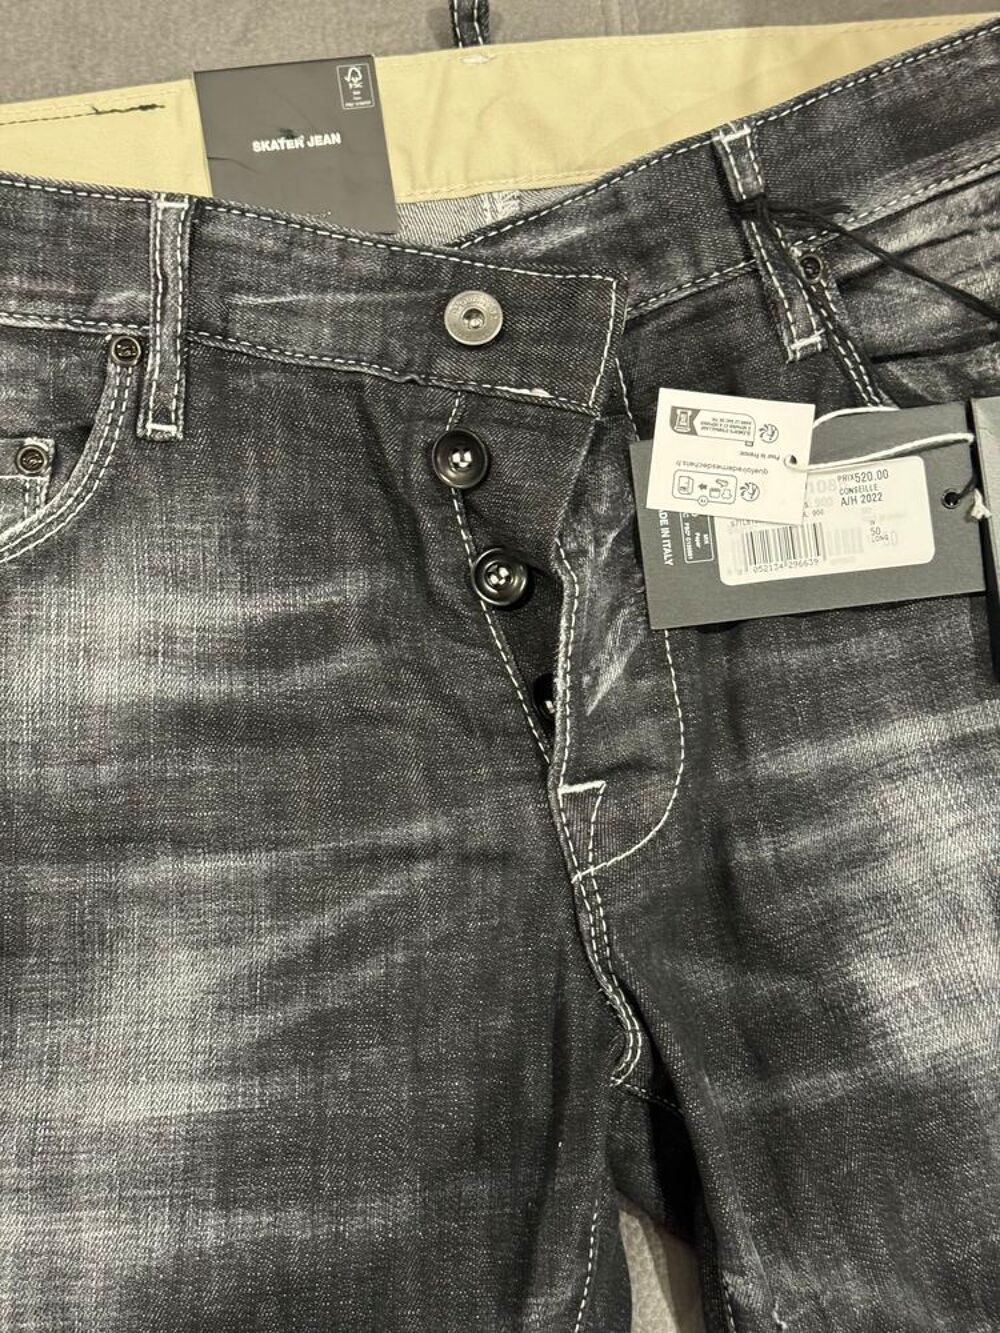 Jean dsquared2 neuf taille 50 Vtements